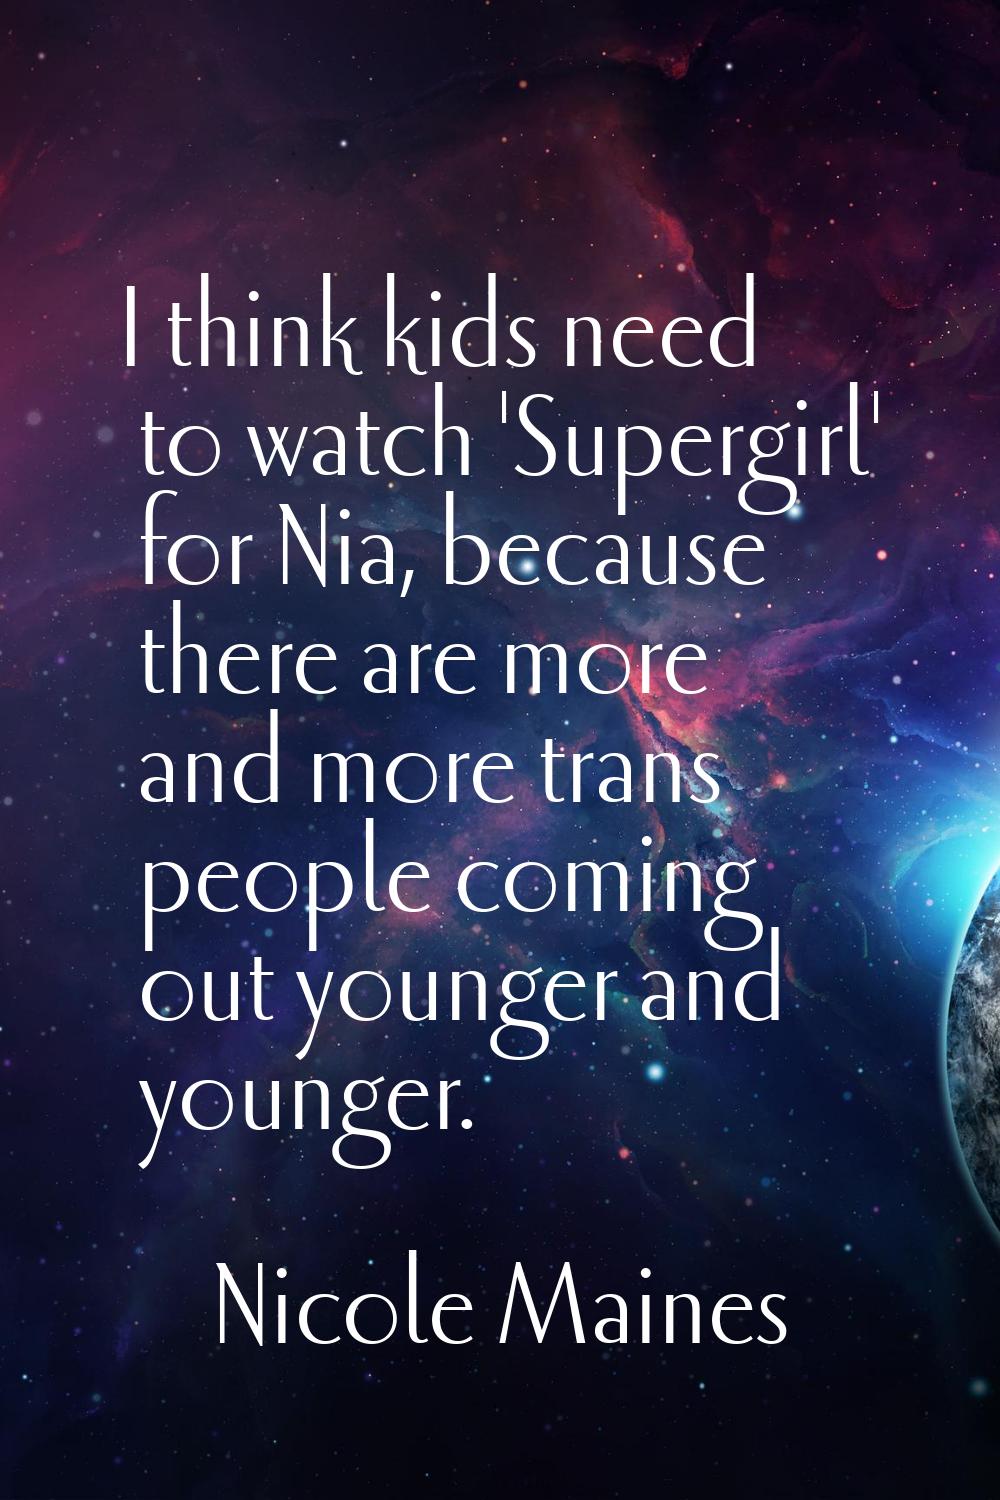 I think kids need to watch 'Supergirl' for Nia, because there are more and more trans people coming